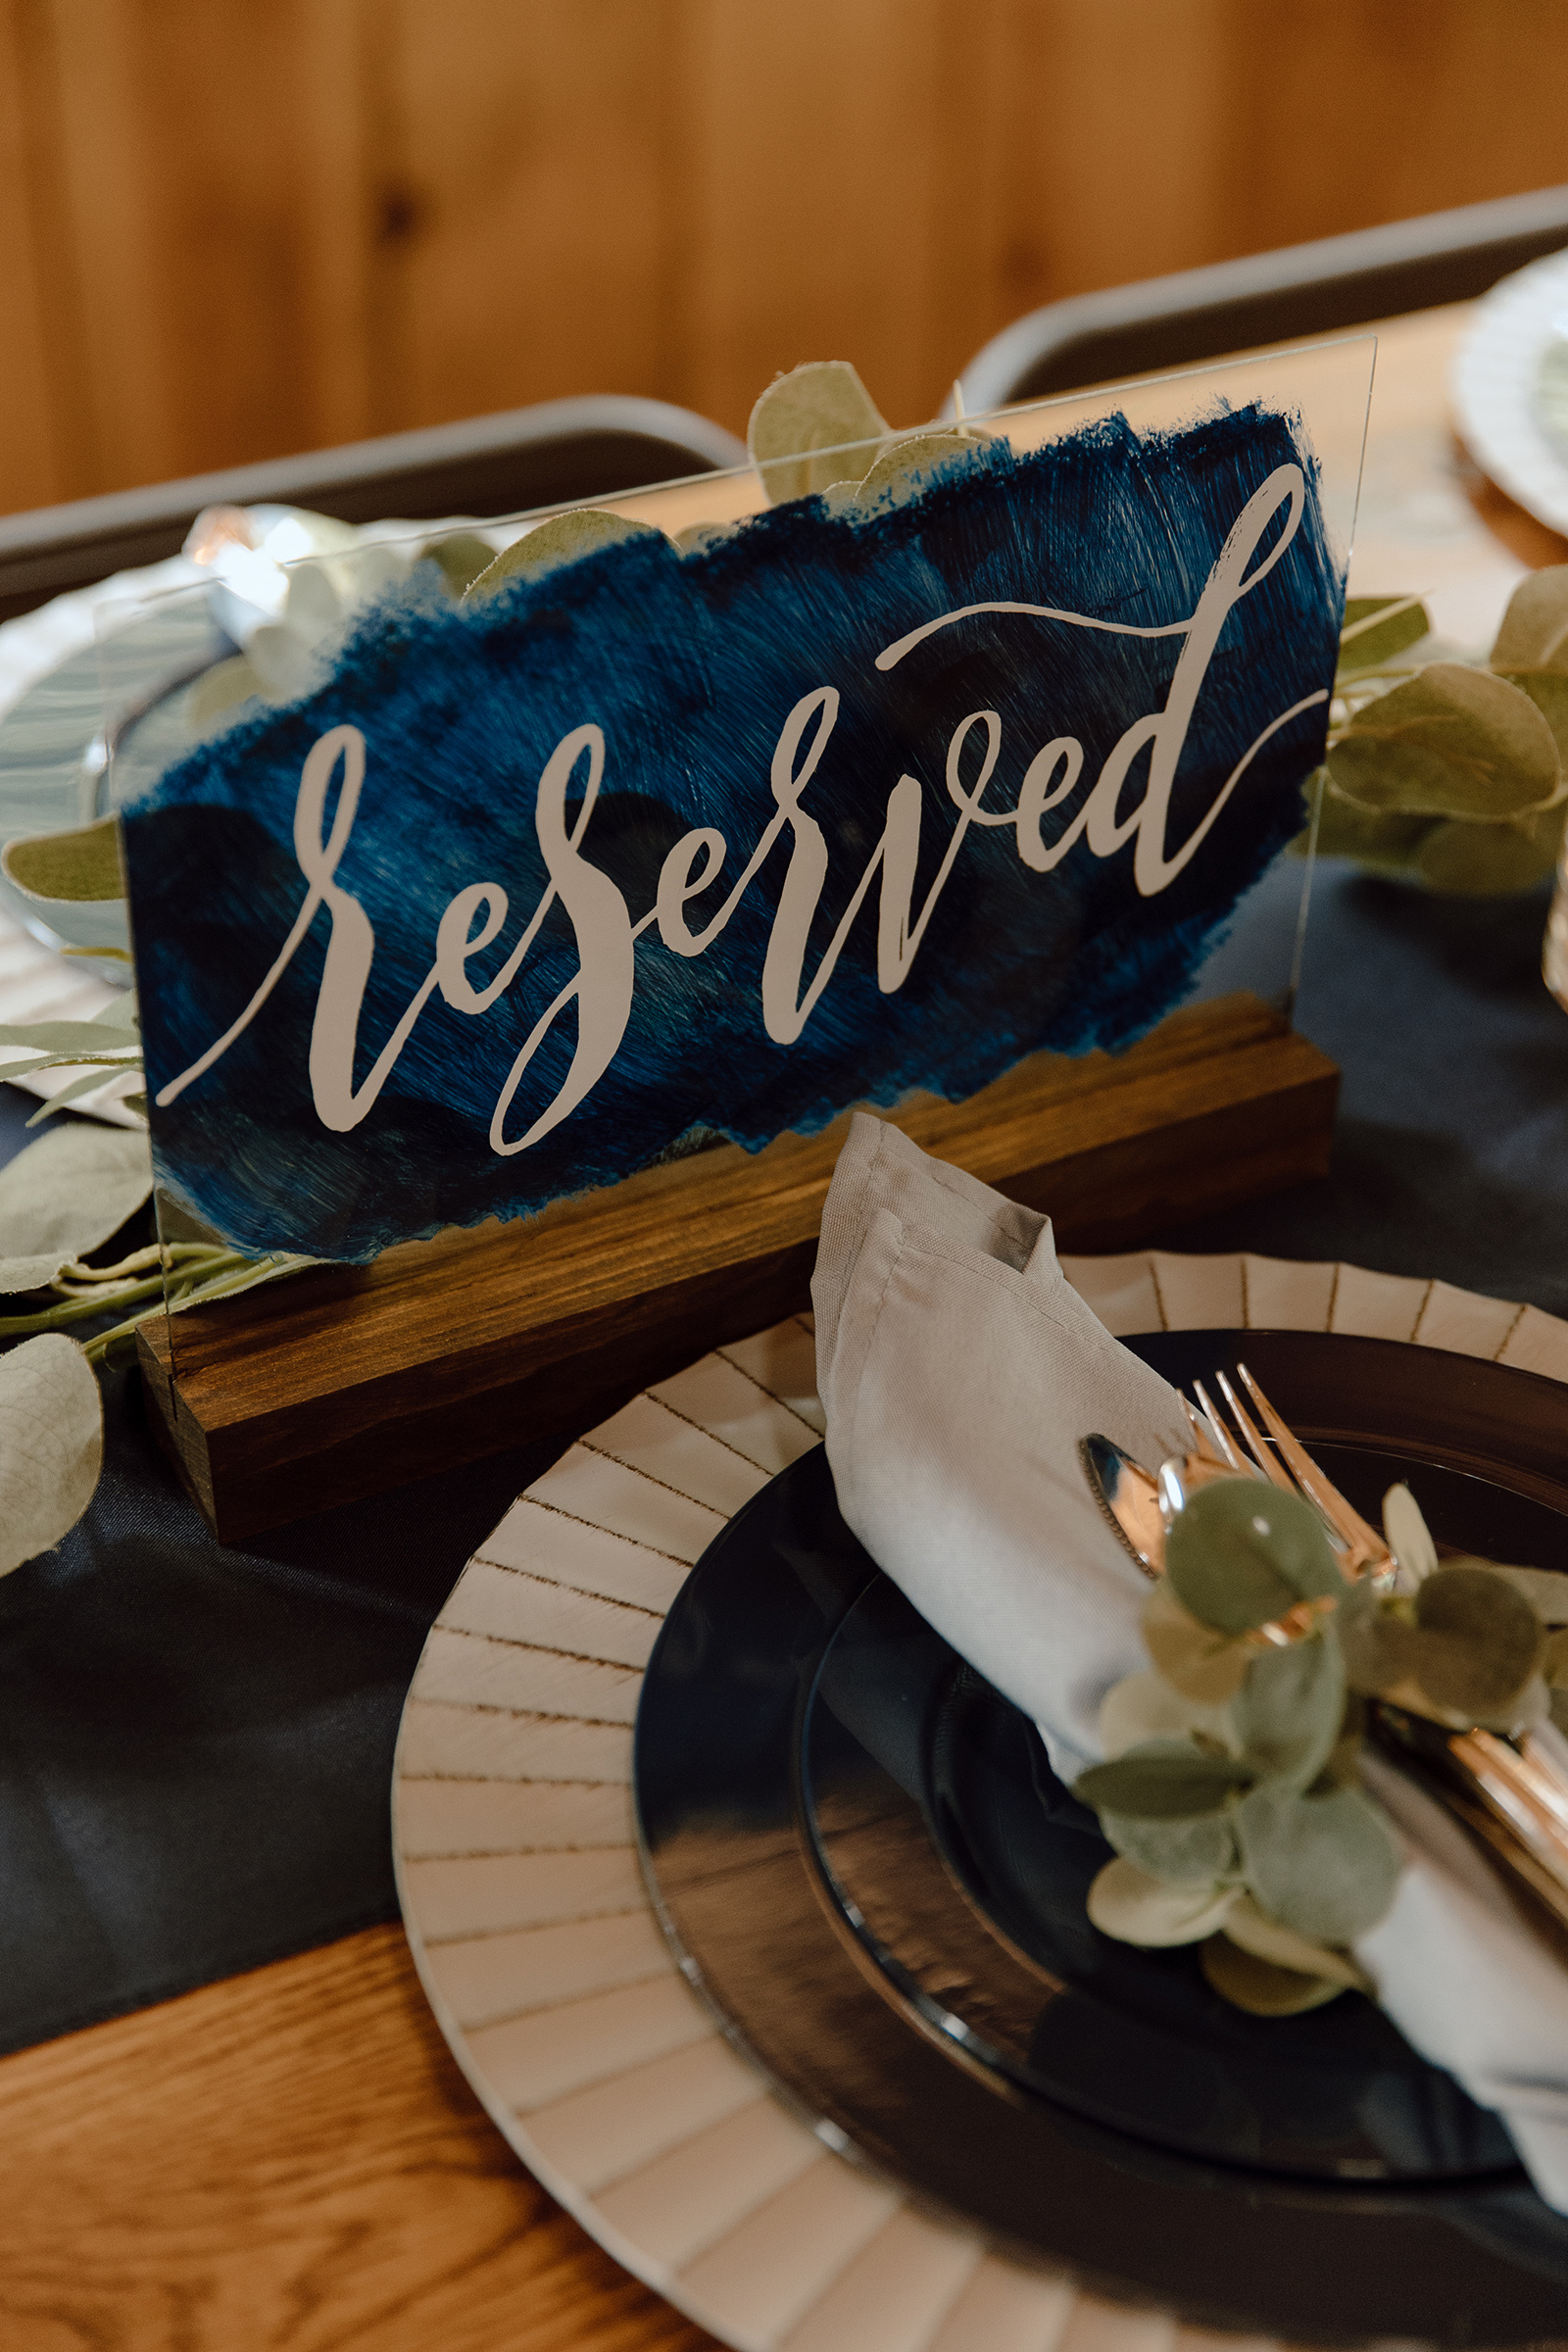 Planning your wedding guest list in Winchester, KY? Discover tips on crafting the perfect guest list and get insights from a Winchester KY photographer on making your special day unforgettable.